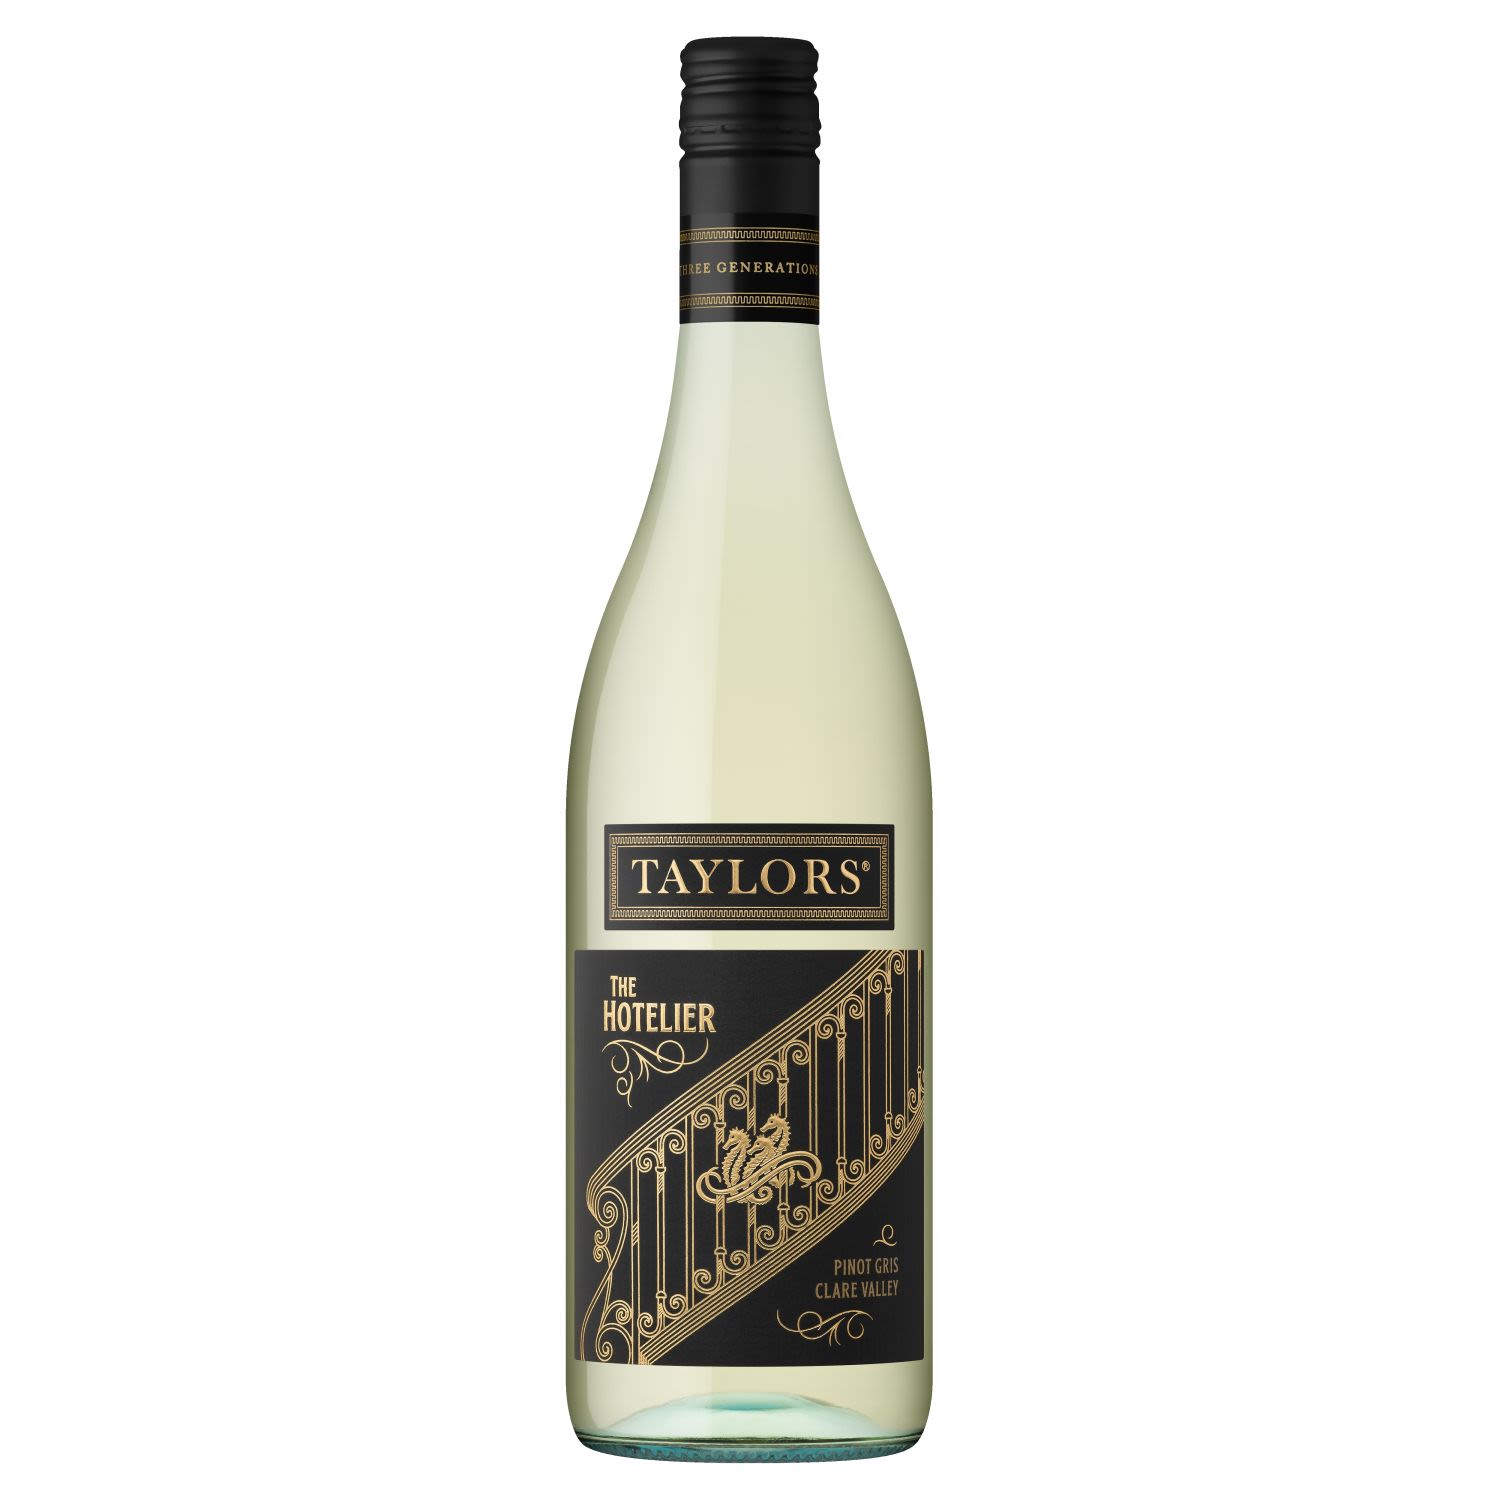 Taylors The Hotelier Pinot Gris 750mL 6 Pack